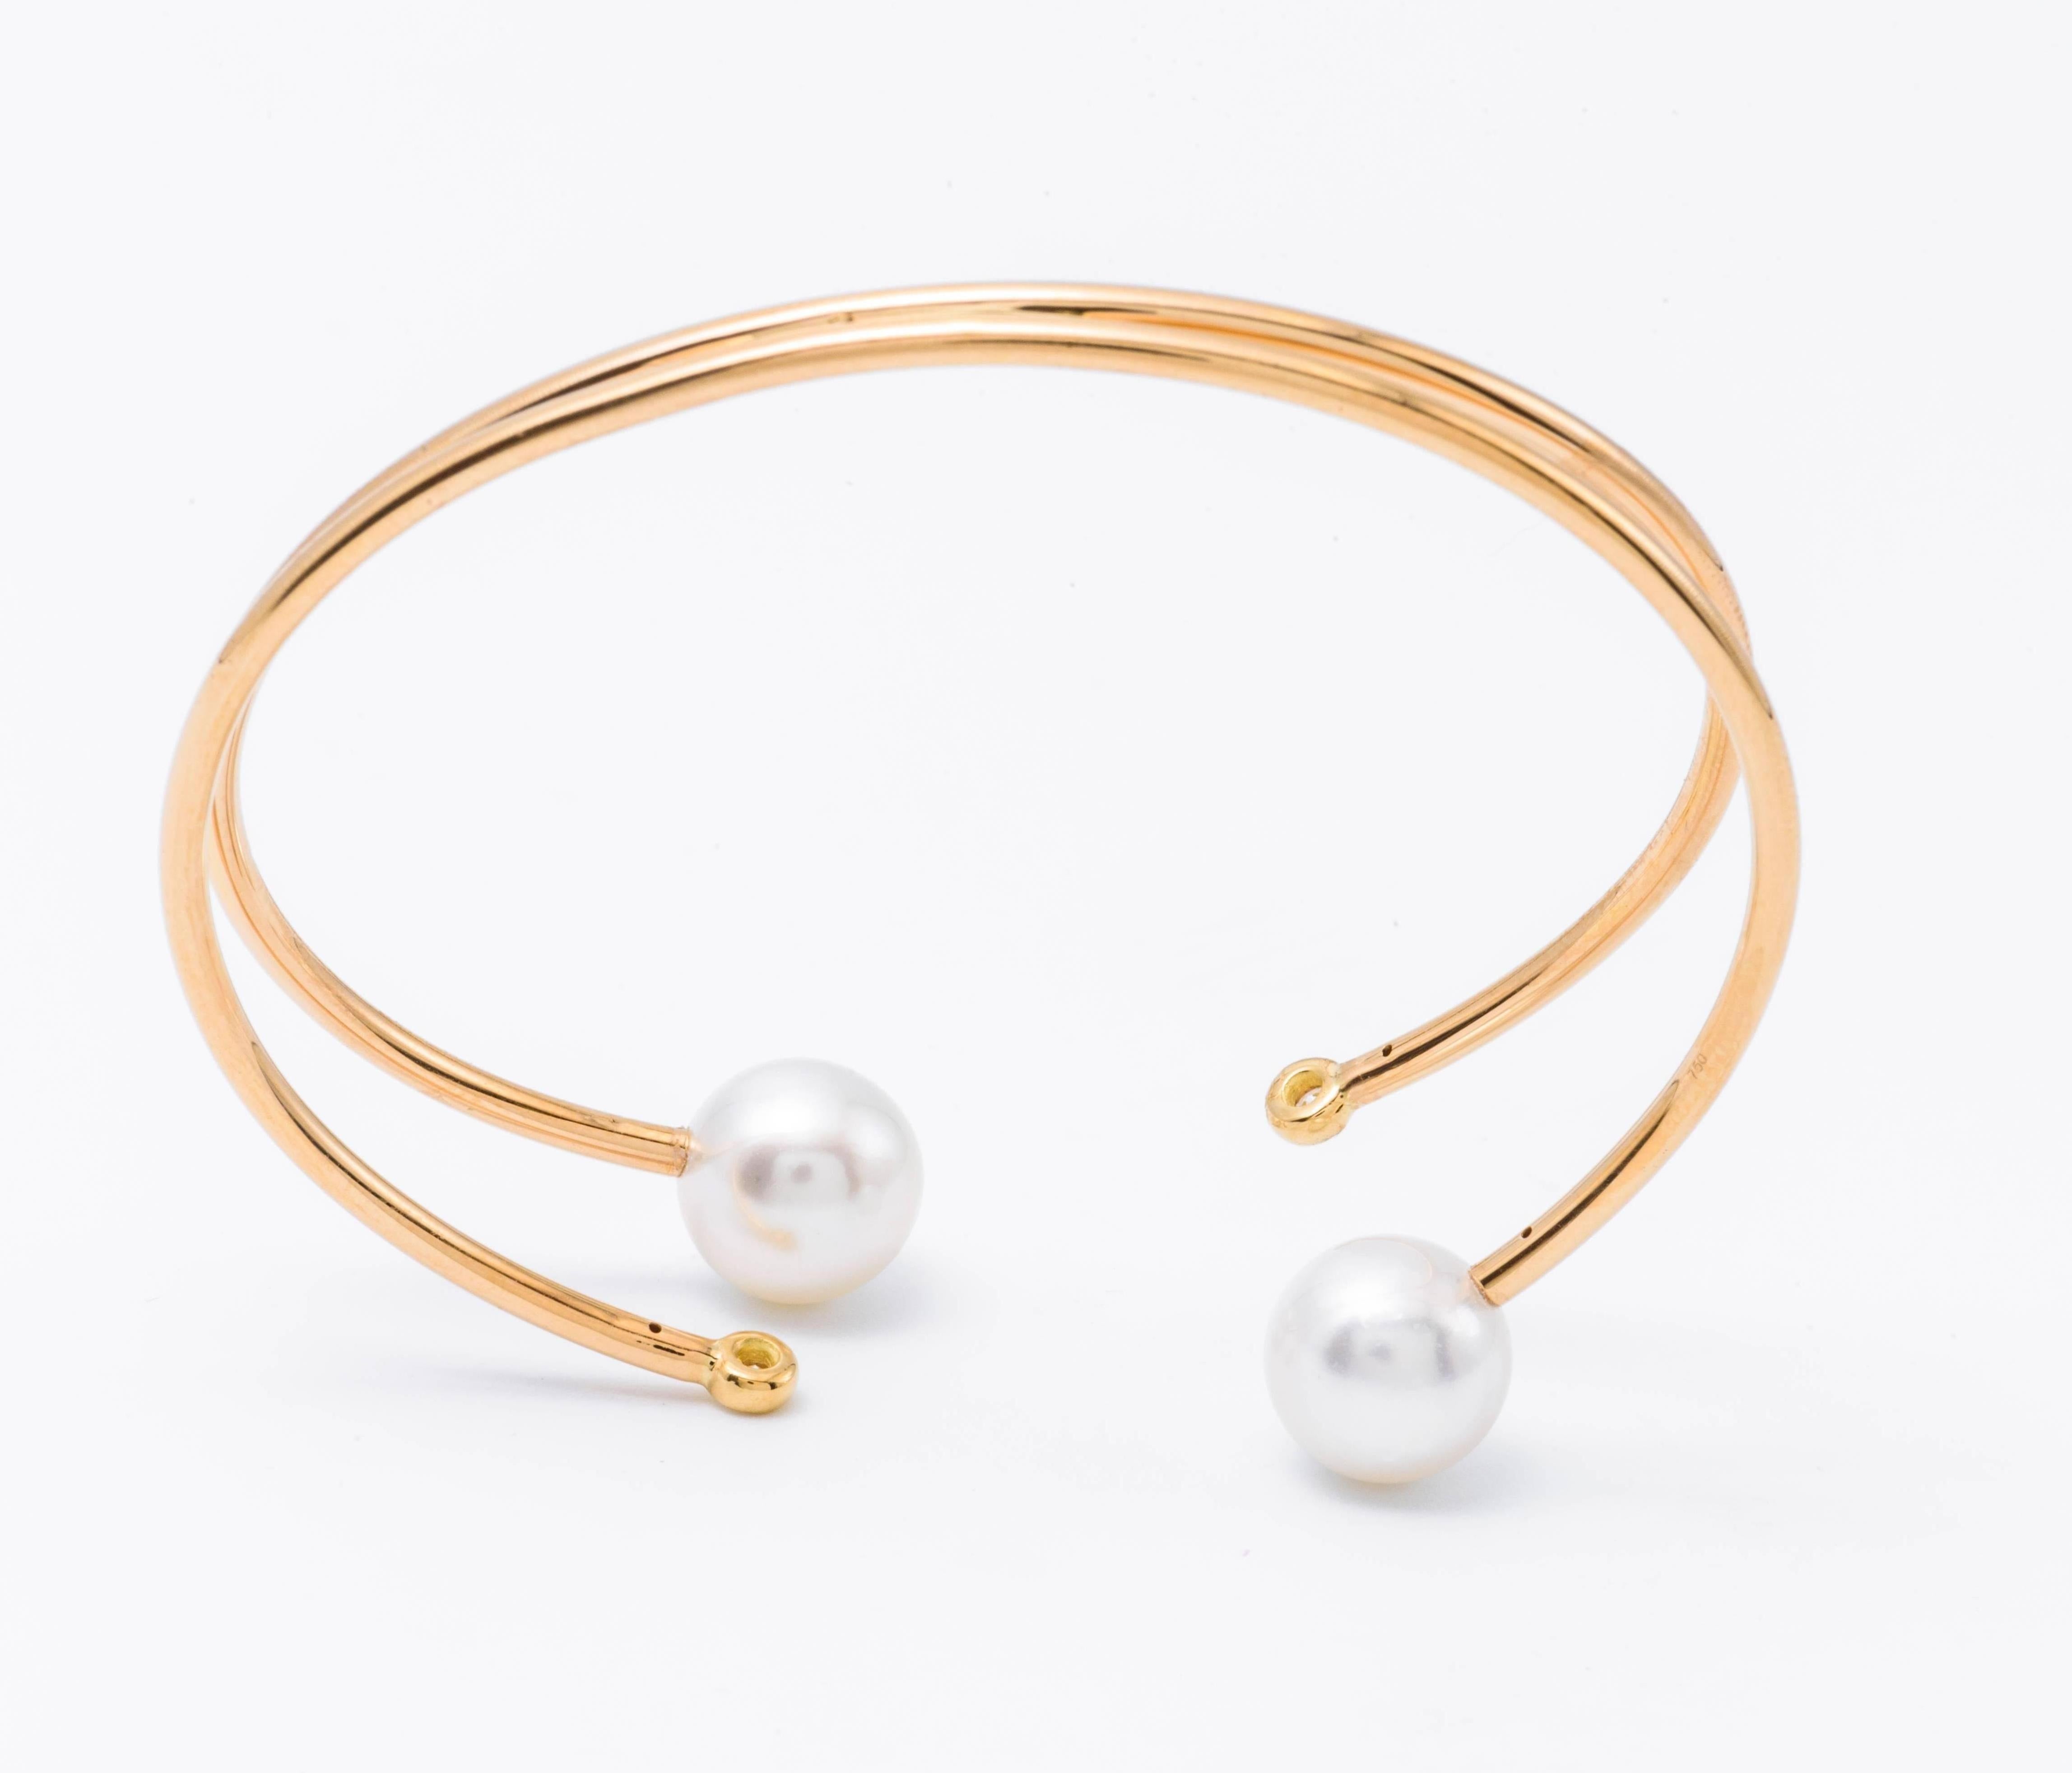 18 Karat yellow gold bangle with 2 diamonds which weights 0.12 Cts T/W and 2 South Sea pearls 9.50-10 mm each